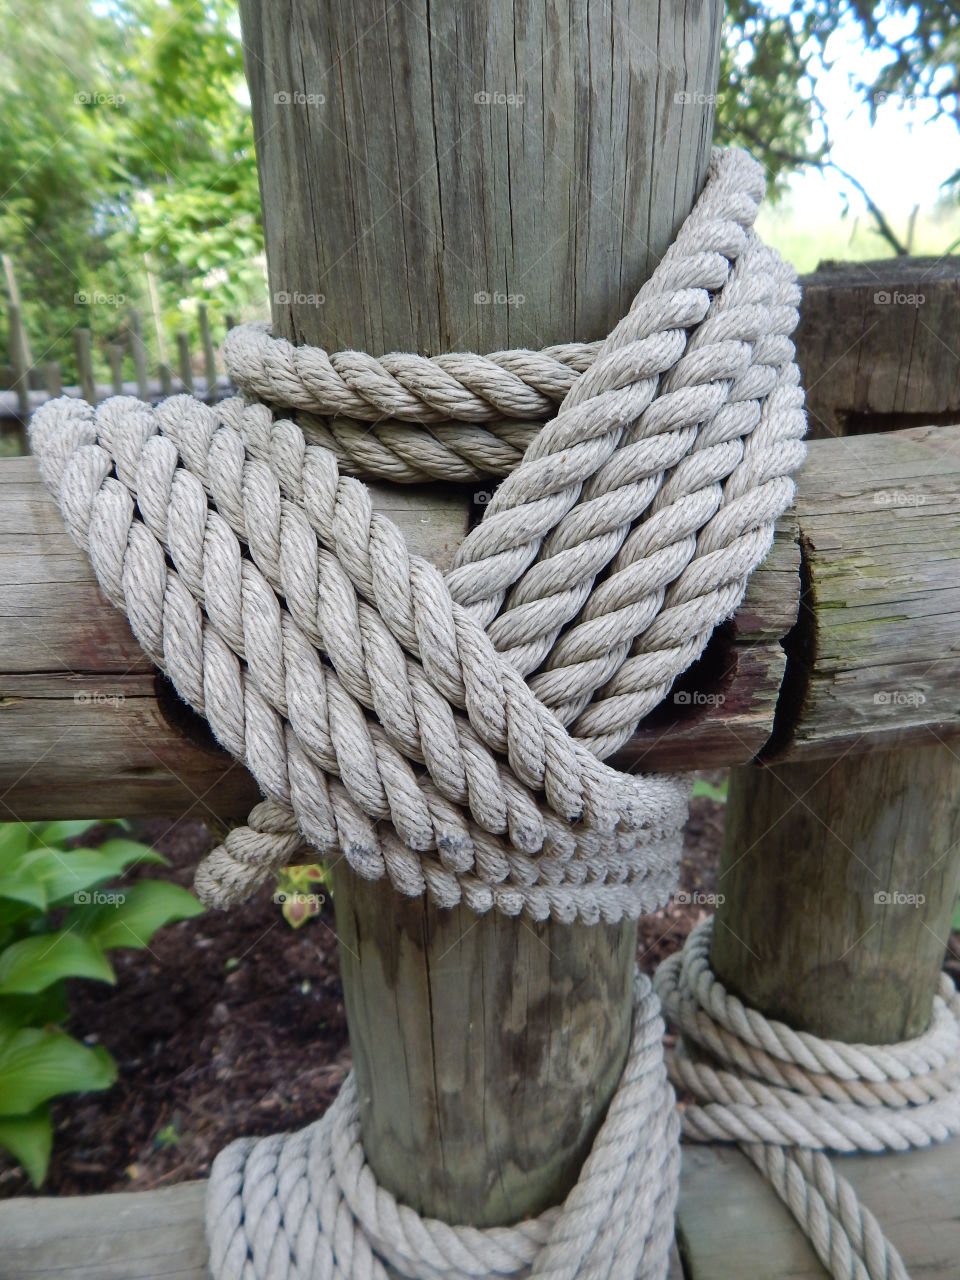 Tied in a knot. Rope tied post